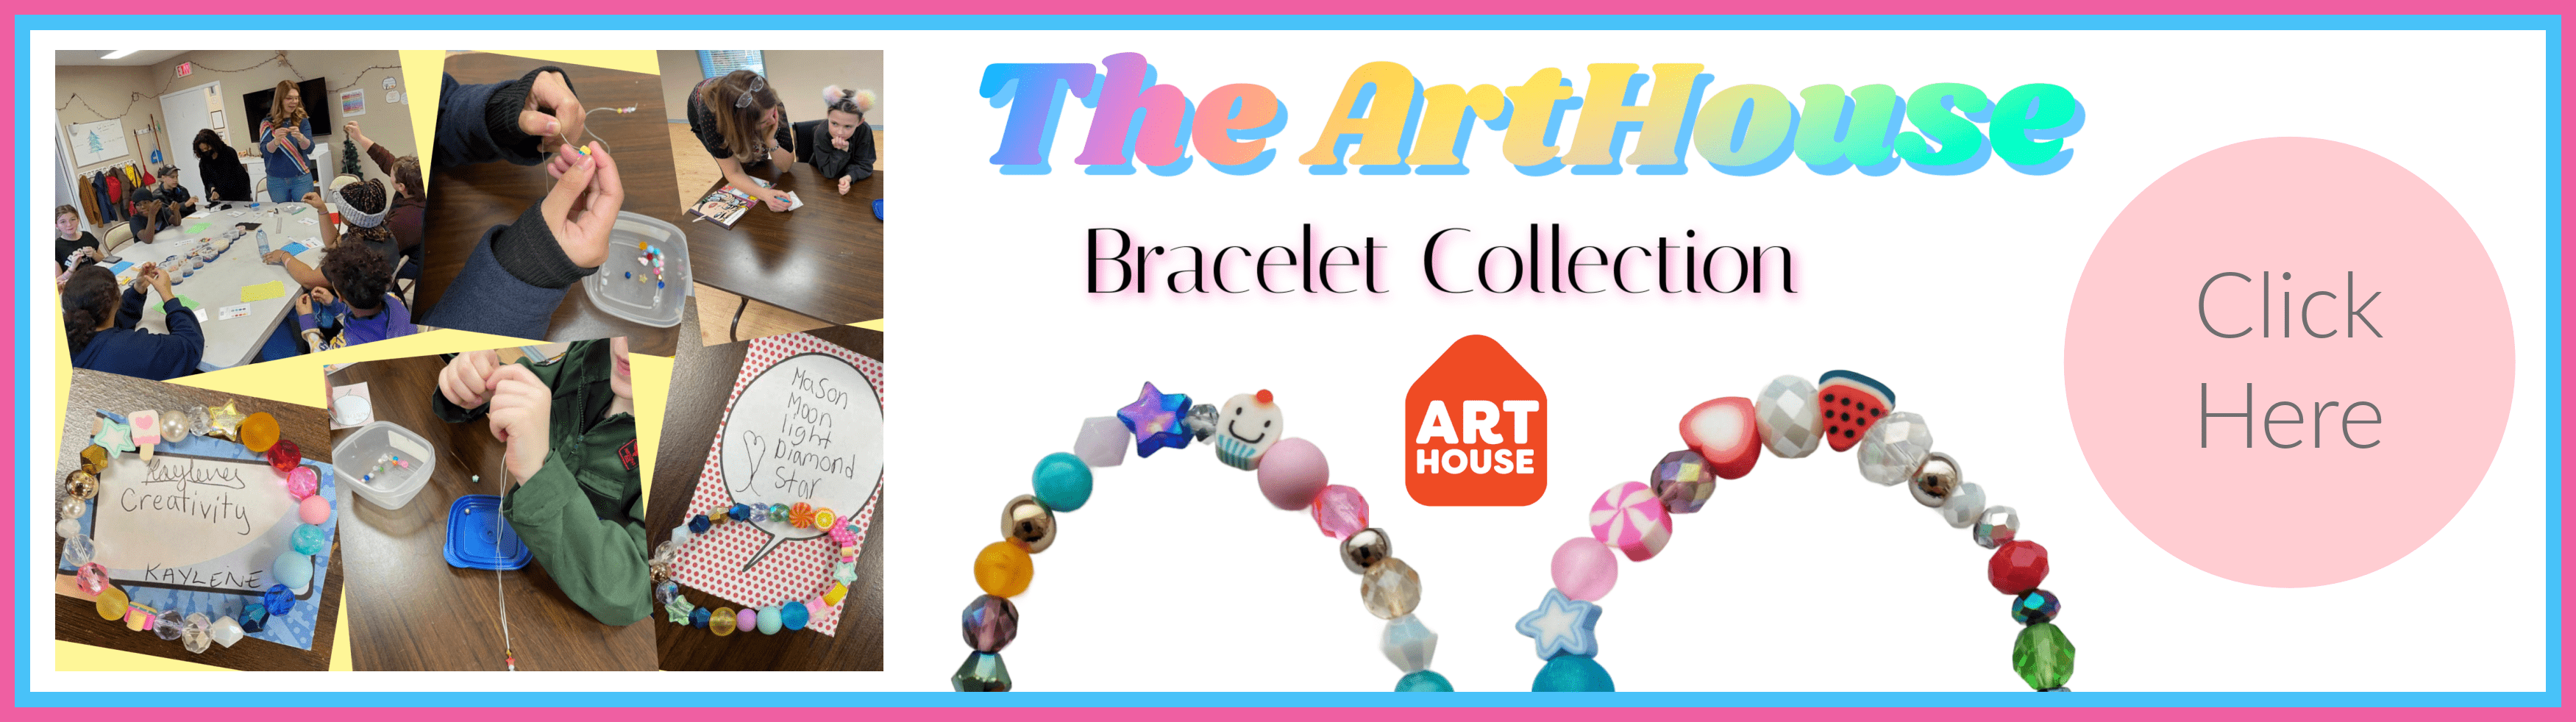 The ArtHouse Bracelet Collection